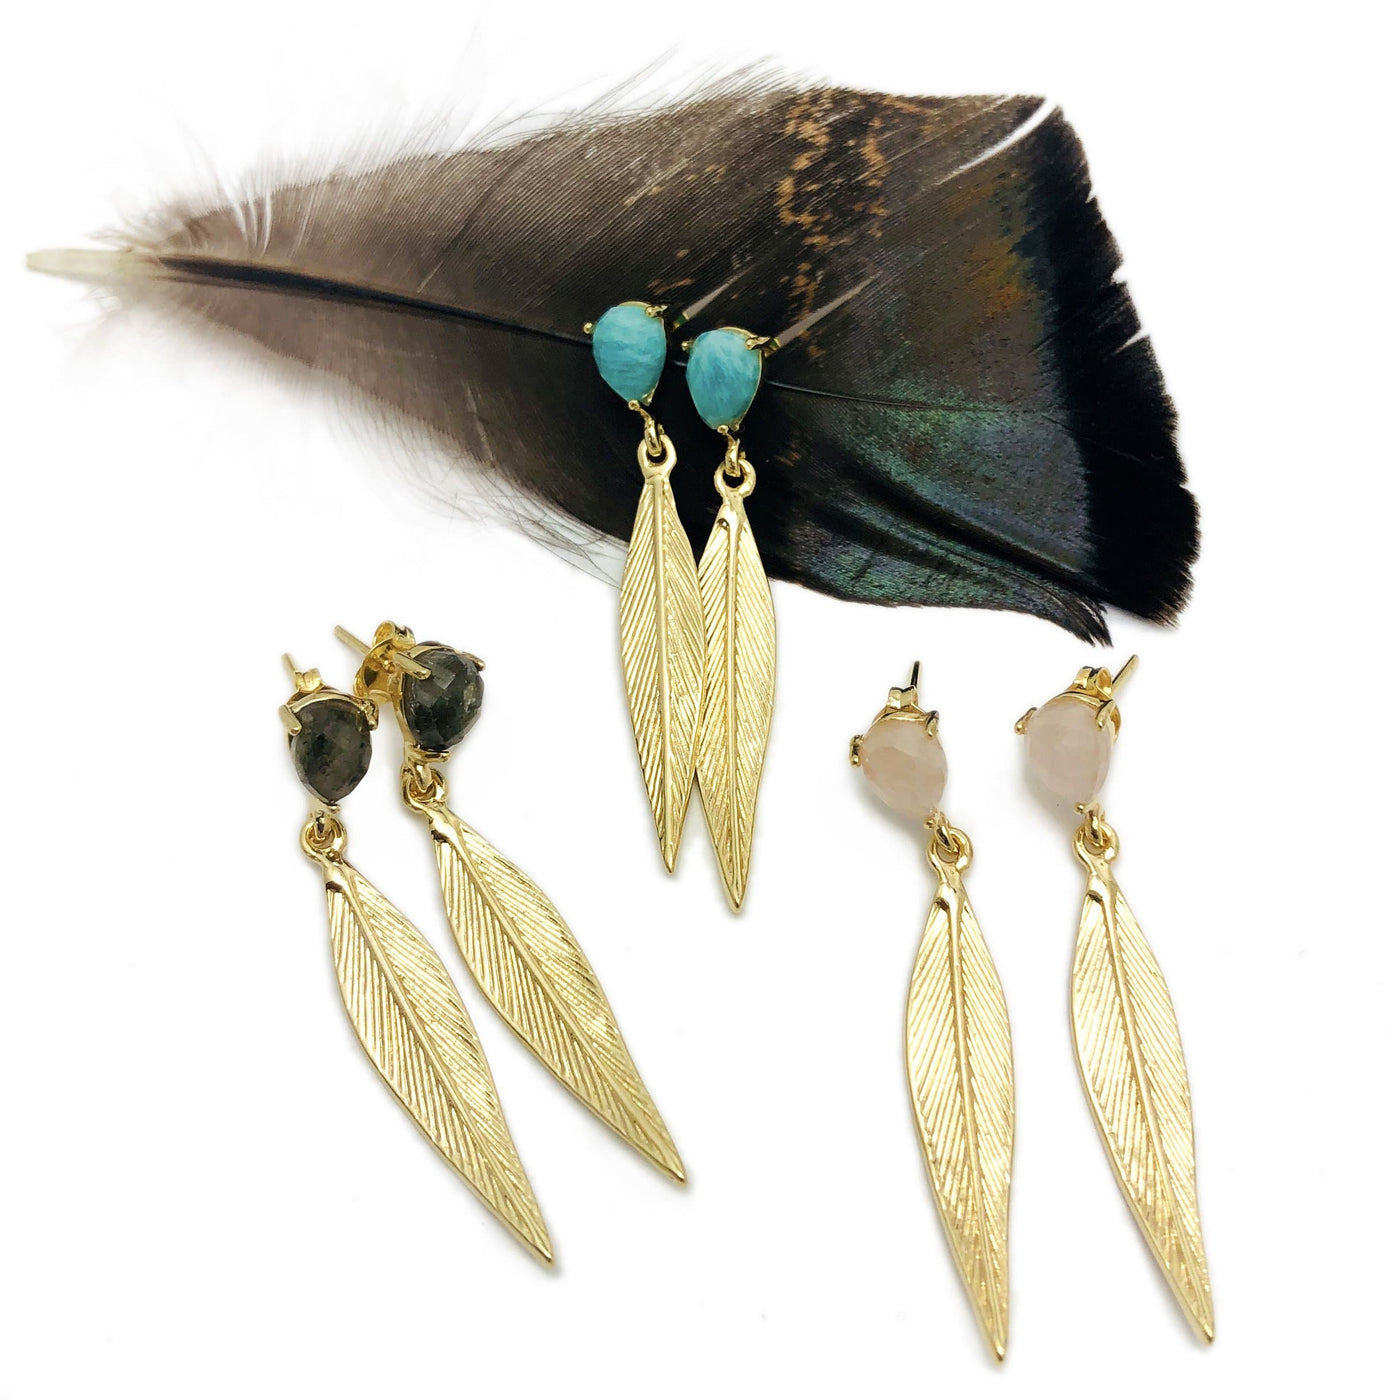 Feather Dangle Earring with Stone Stud on white background.